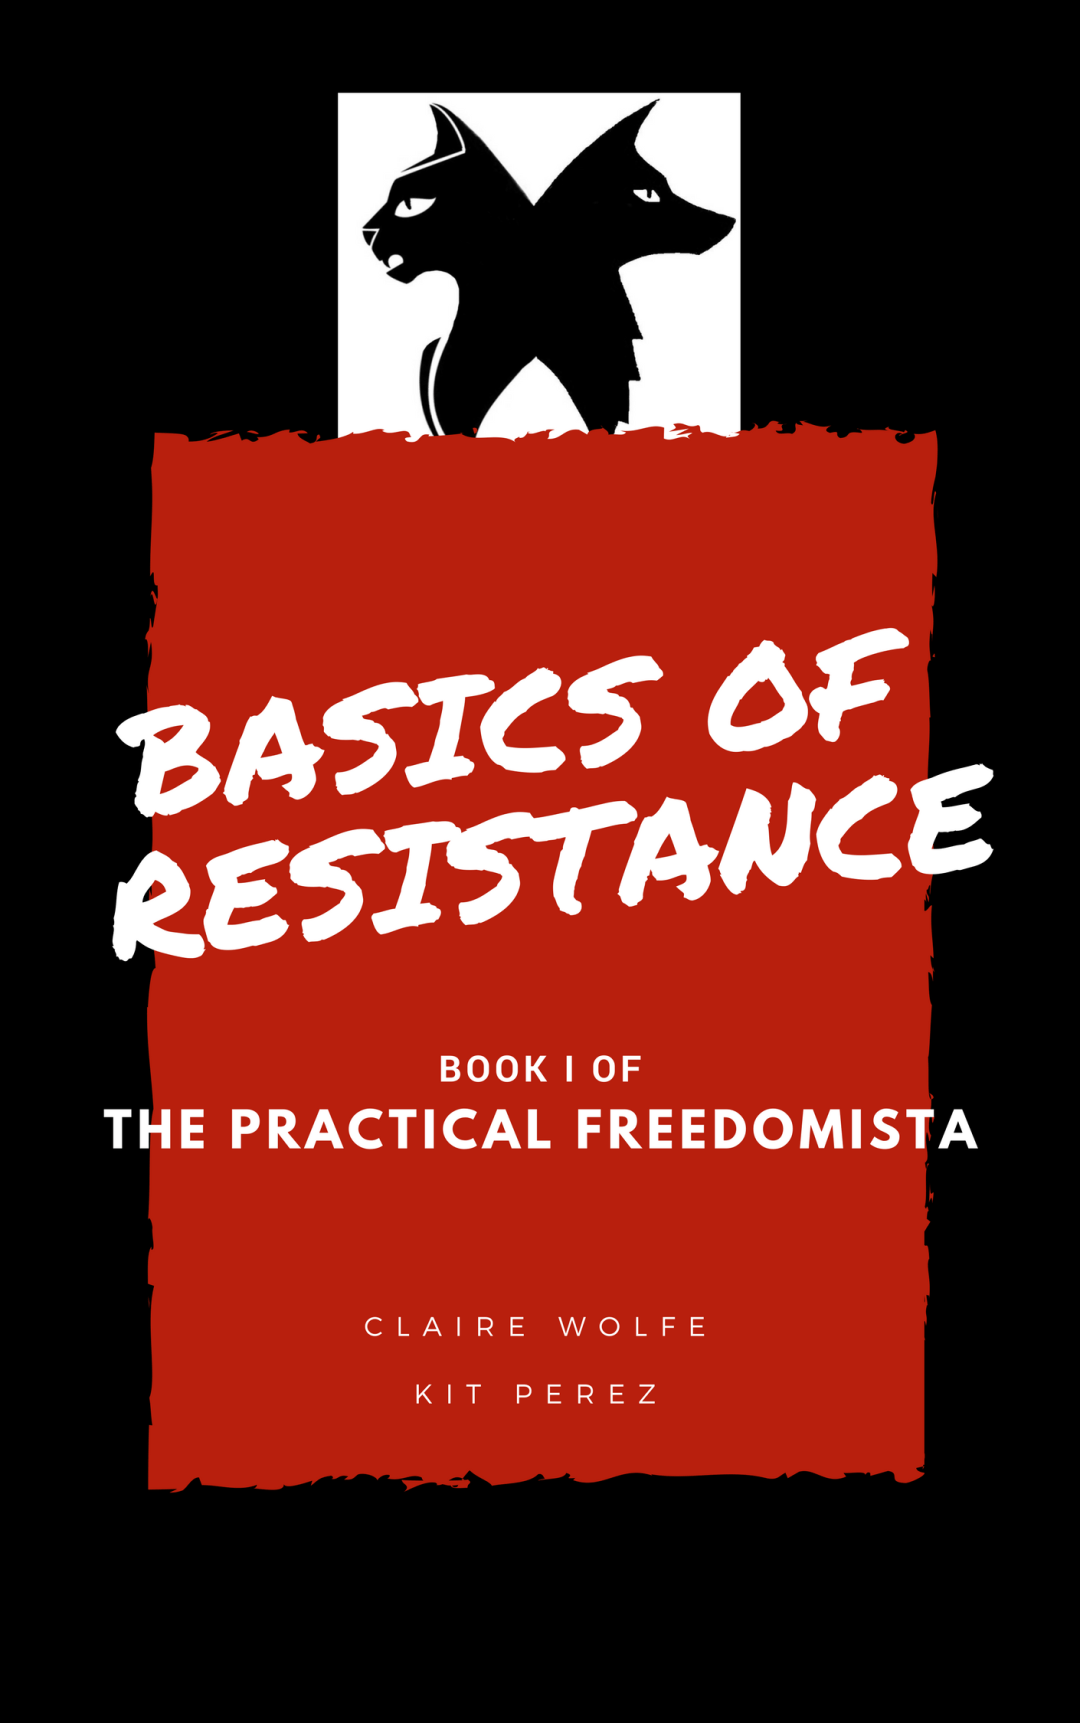 The “Basics of Resistance” book cover image features cat and wolf icons, a play on the names of the authors: Claire Wolfe and Kit Perez